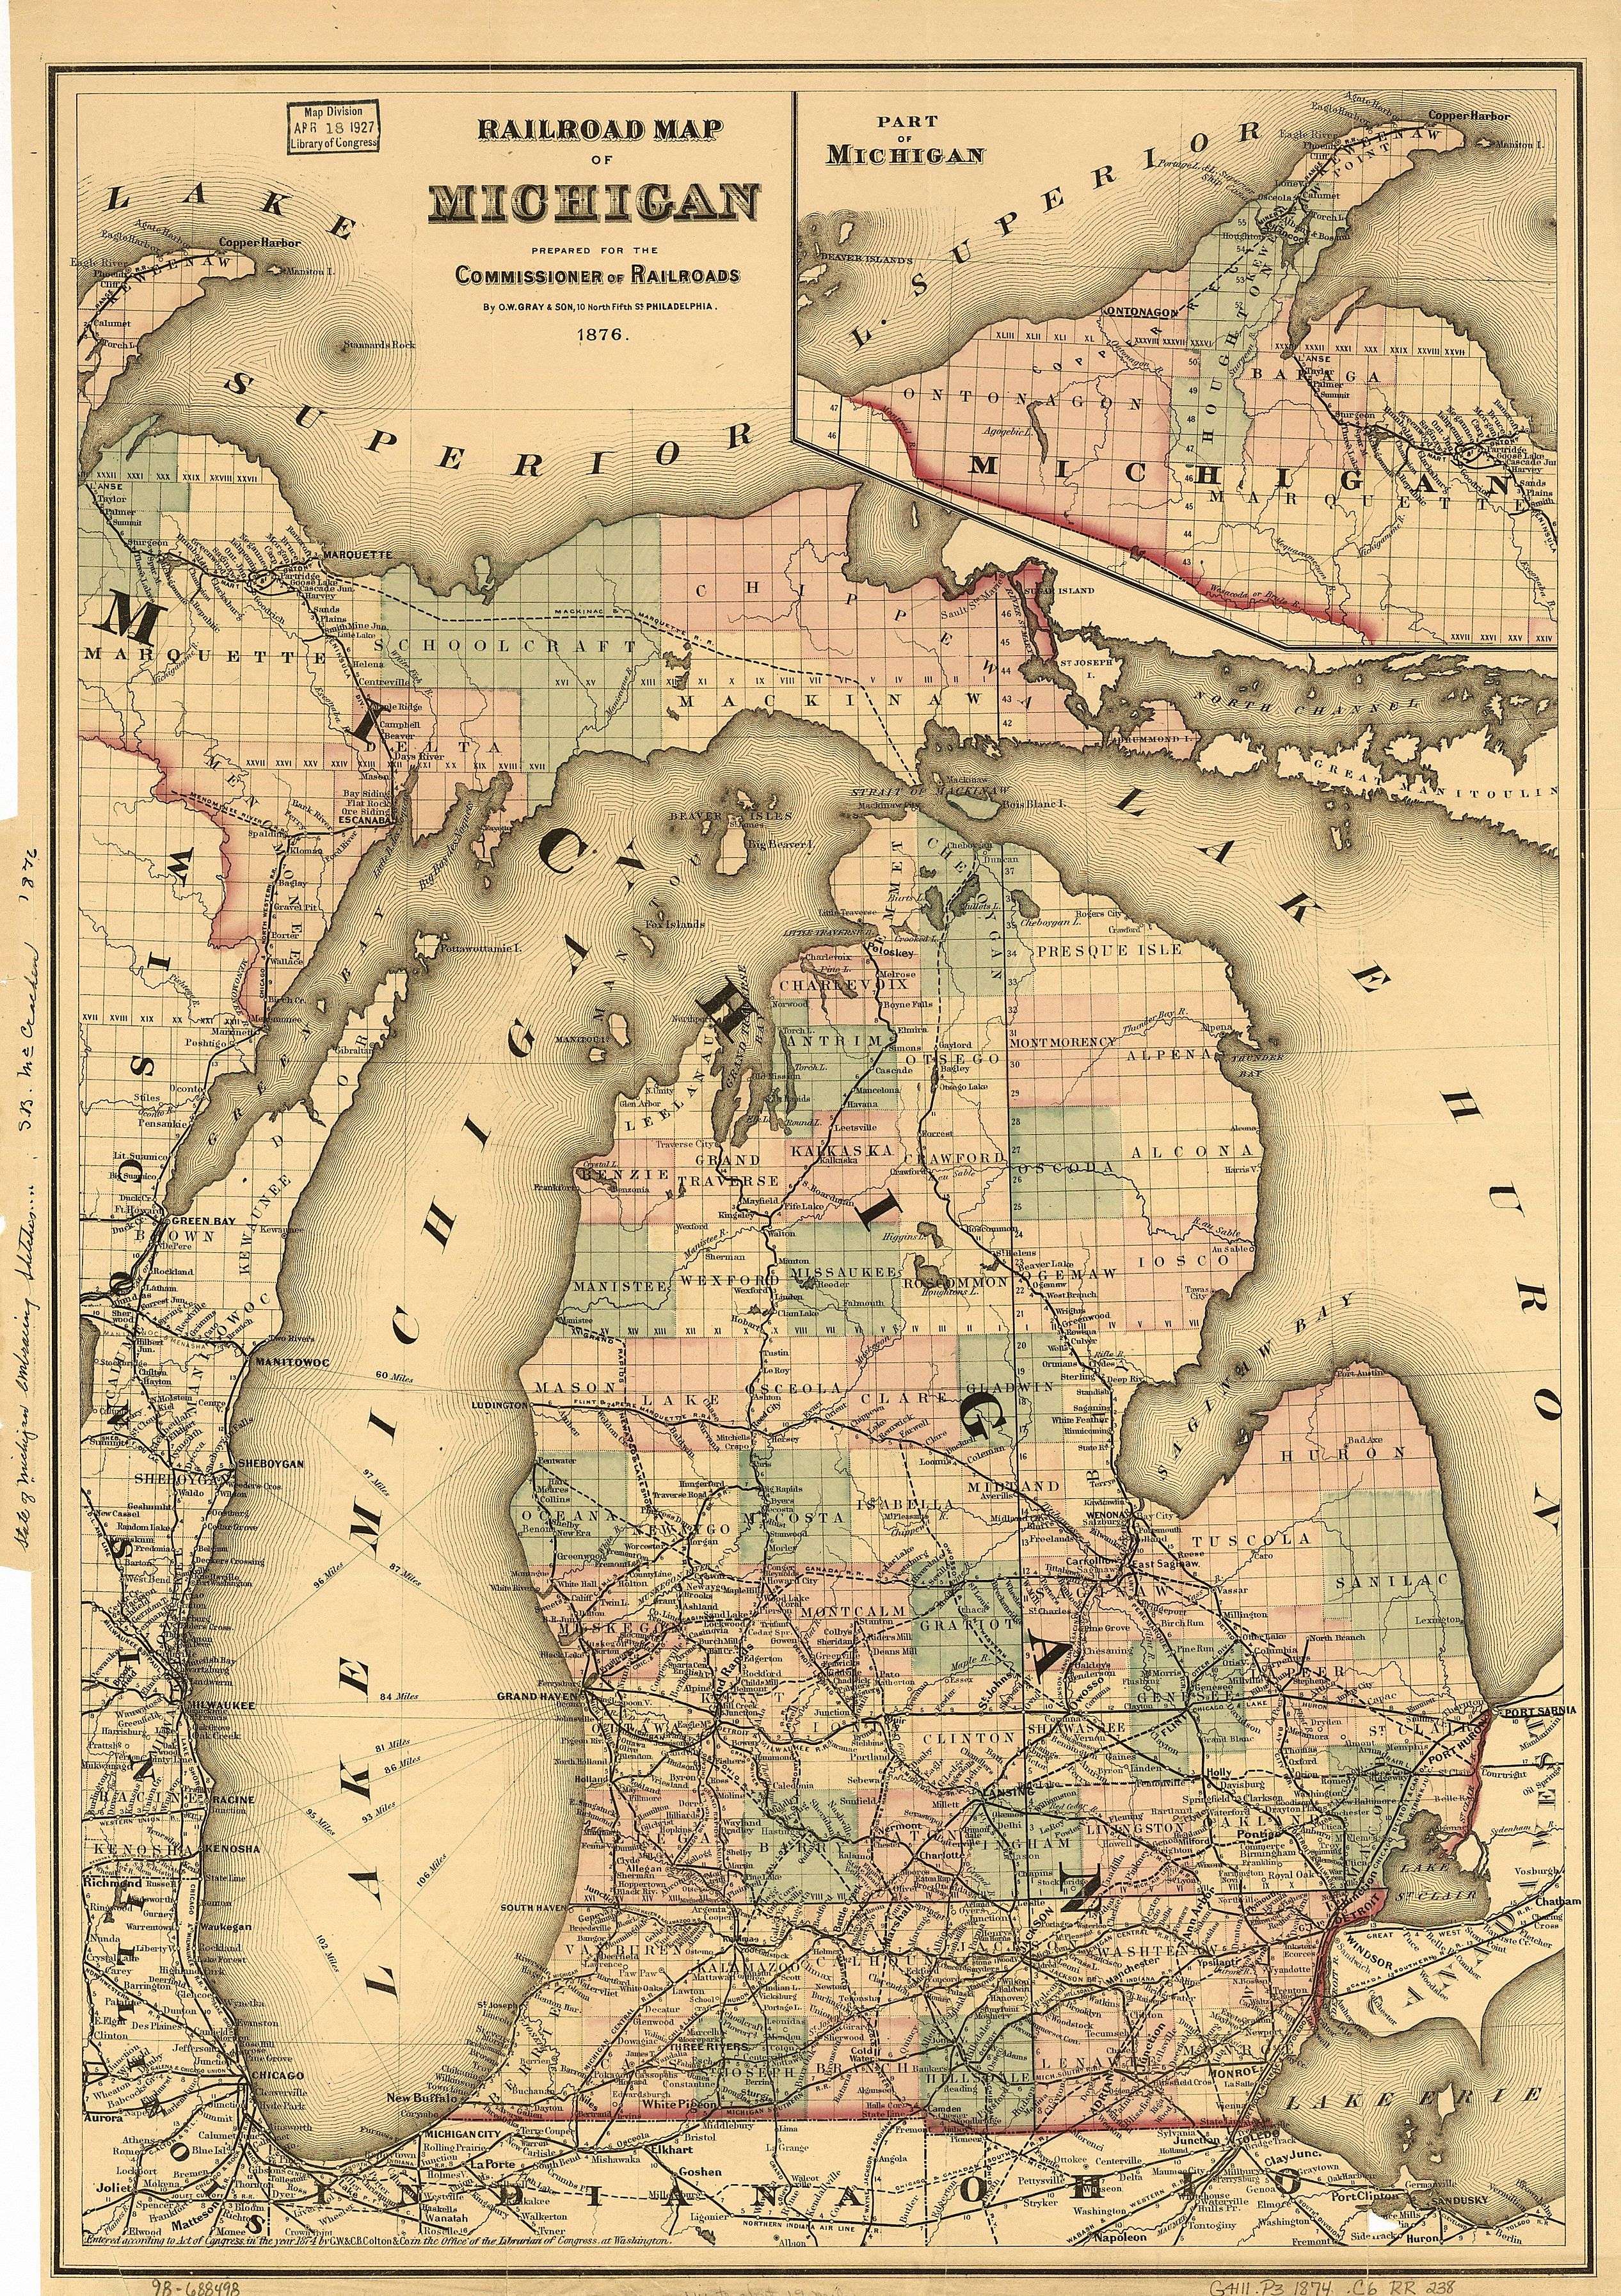 This 1876 map shows Cheboygan County between Emmet County and Presque Isle County.